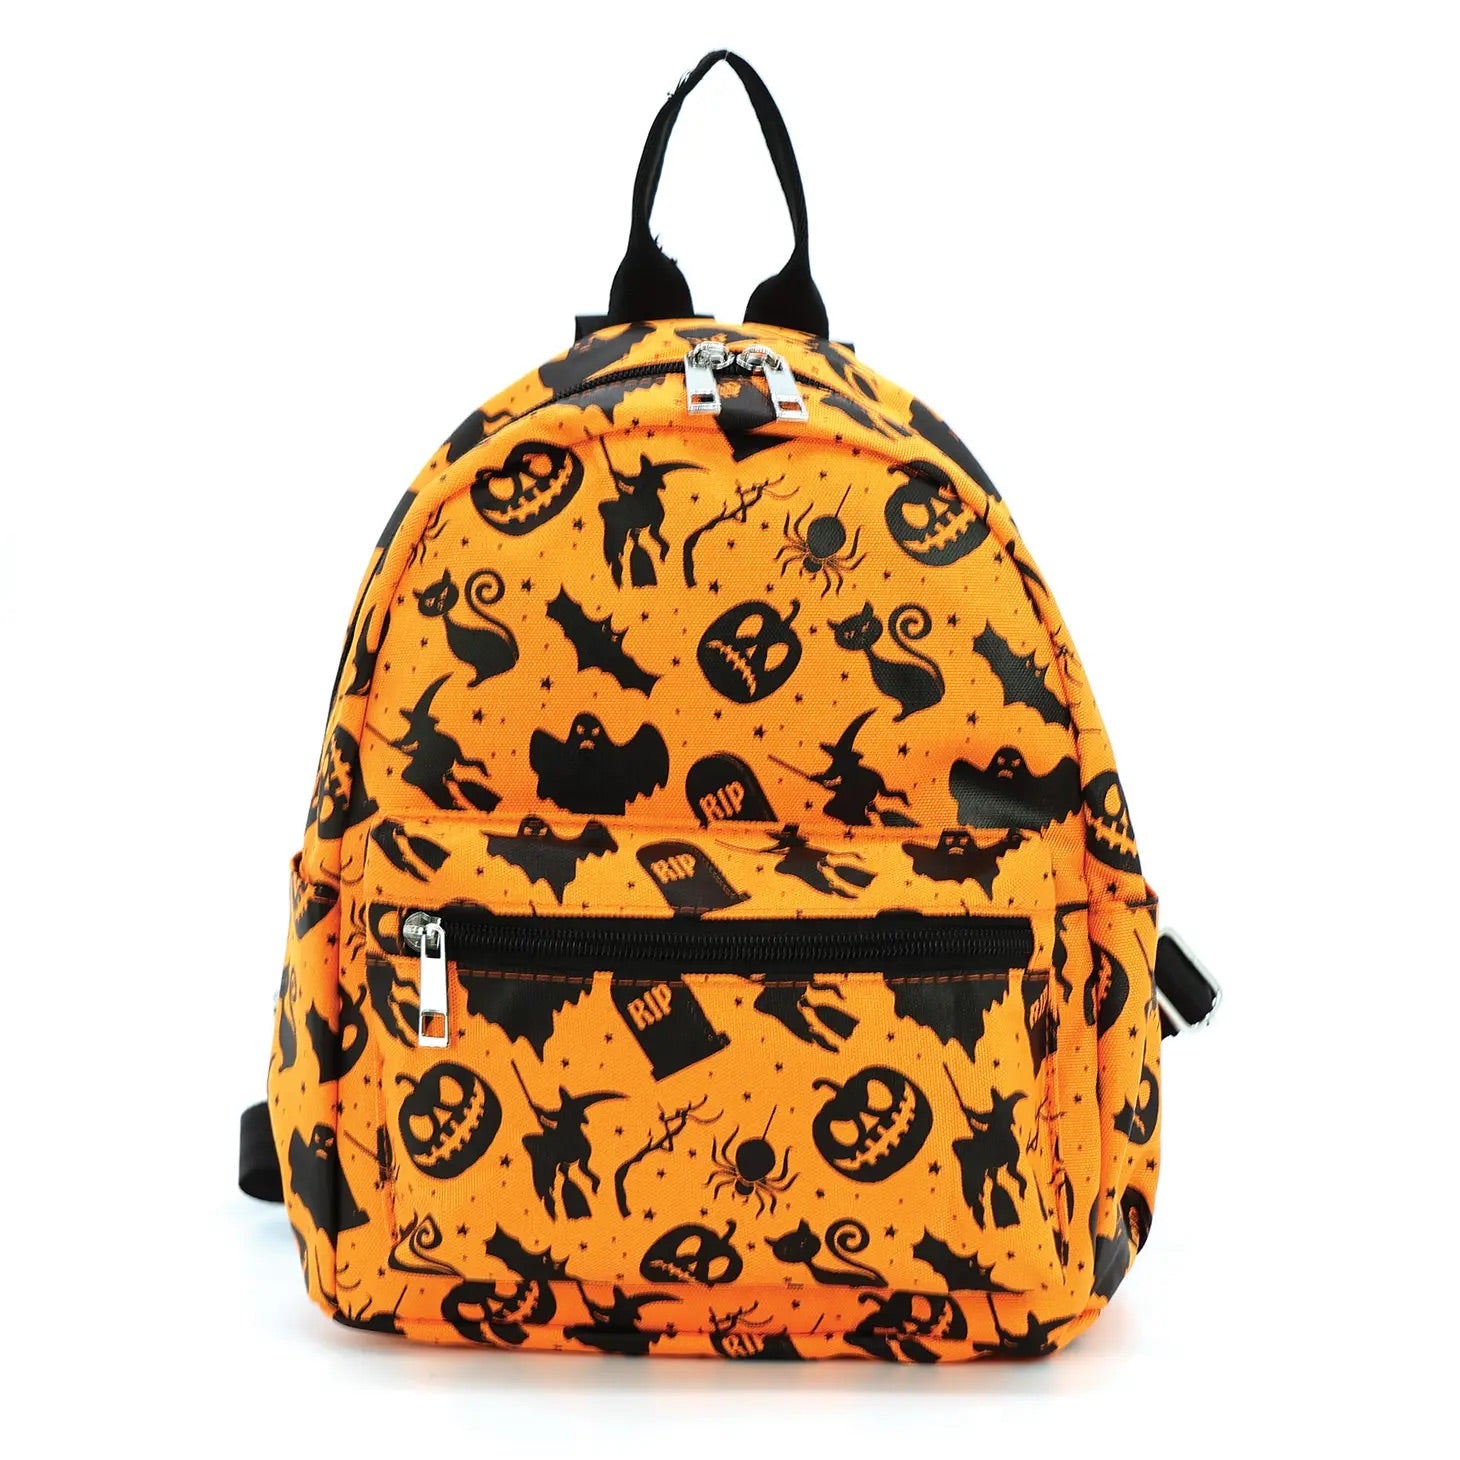 An orange mini backpack with an all-over Halloween pattern- tombstones, witches, spiders, black cats, ghosts, and tombstones printed in black. Seen from the front 